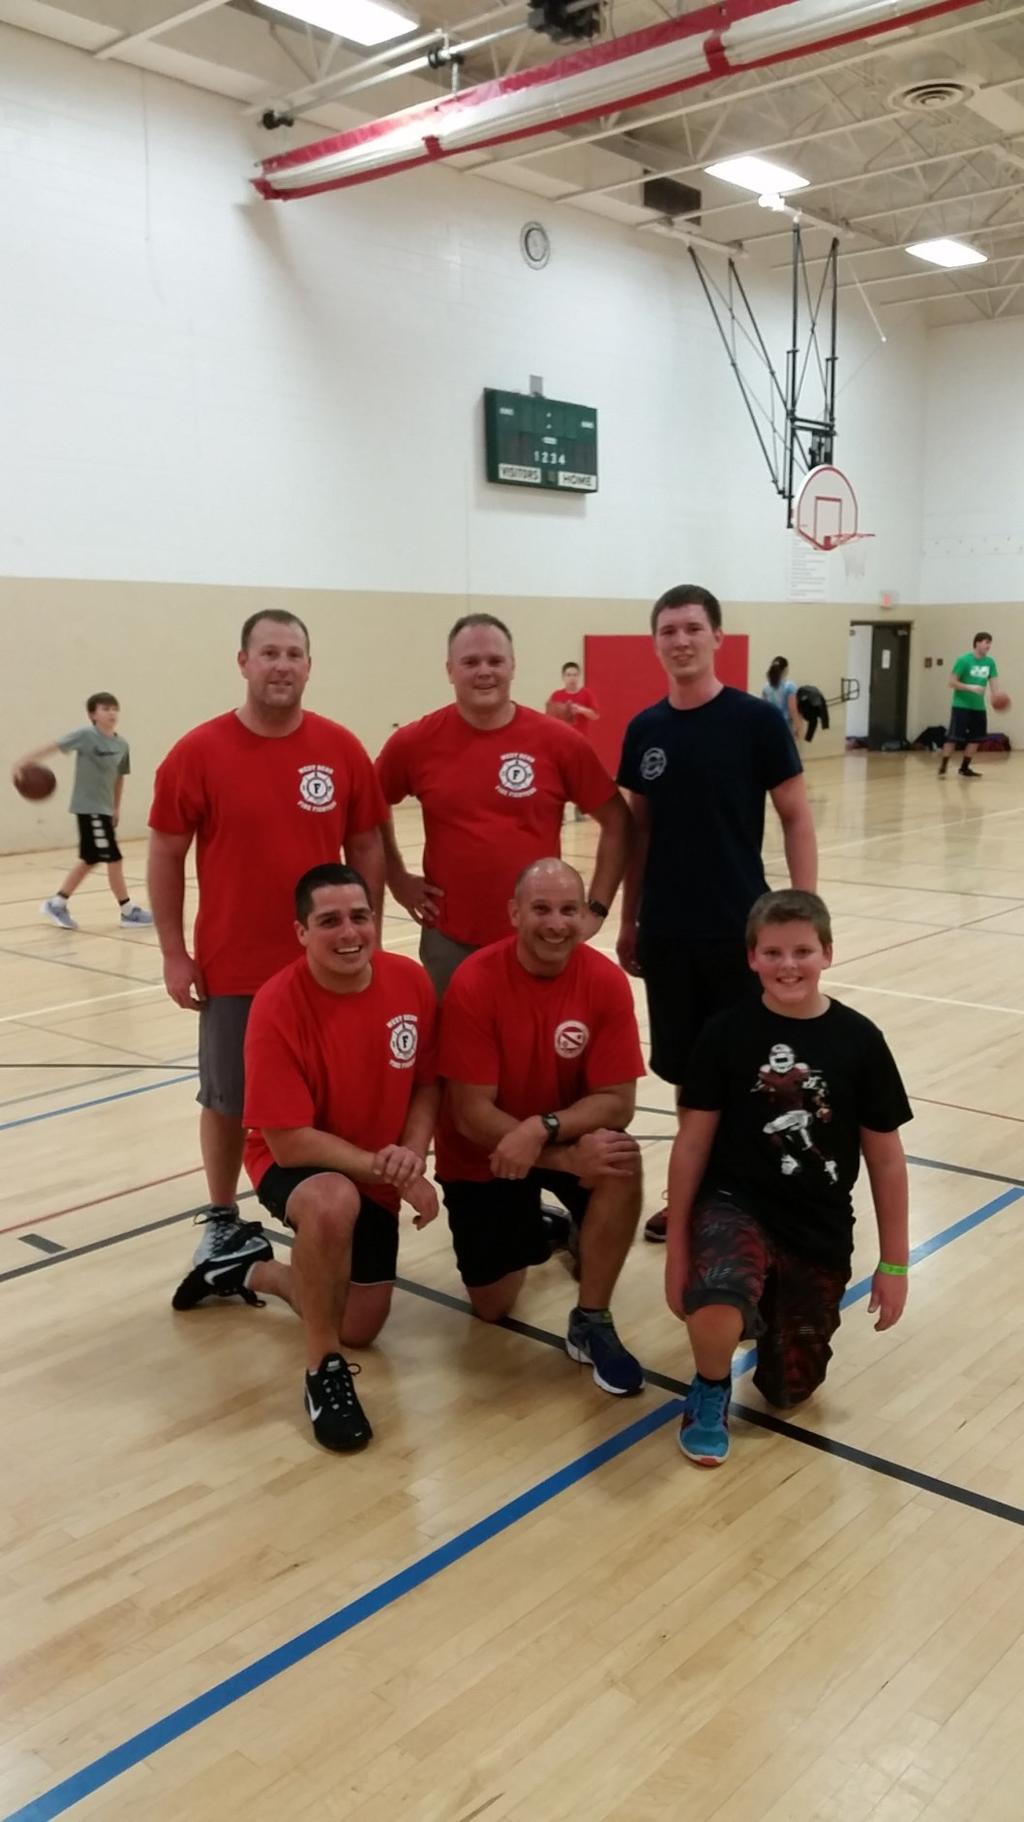 Fire Instruction & Training Bureau Deputy Chief Chuck Beistle & Captain Tom Thrash WBFD Public Relations Page 7 Midnight Hoops at the YMCA: The local Kettle Moraine YMCA partnered up with West Police